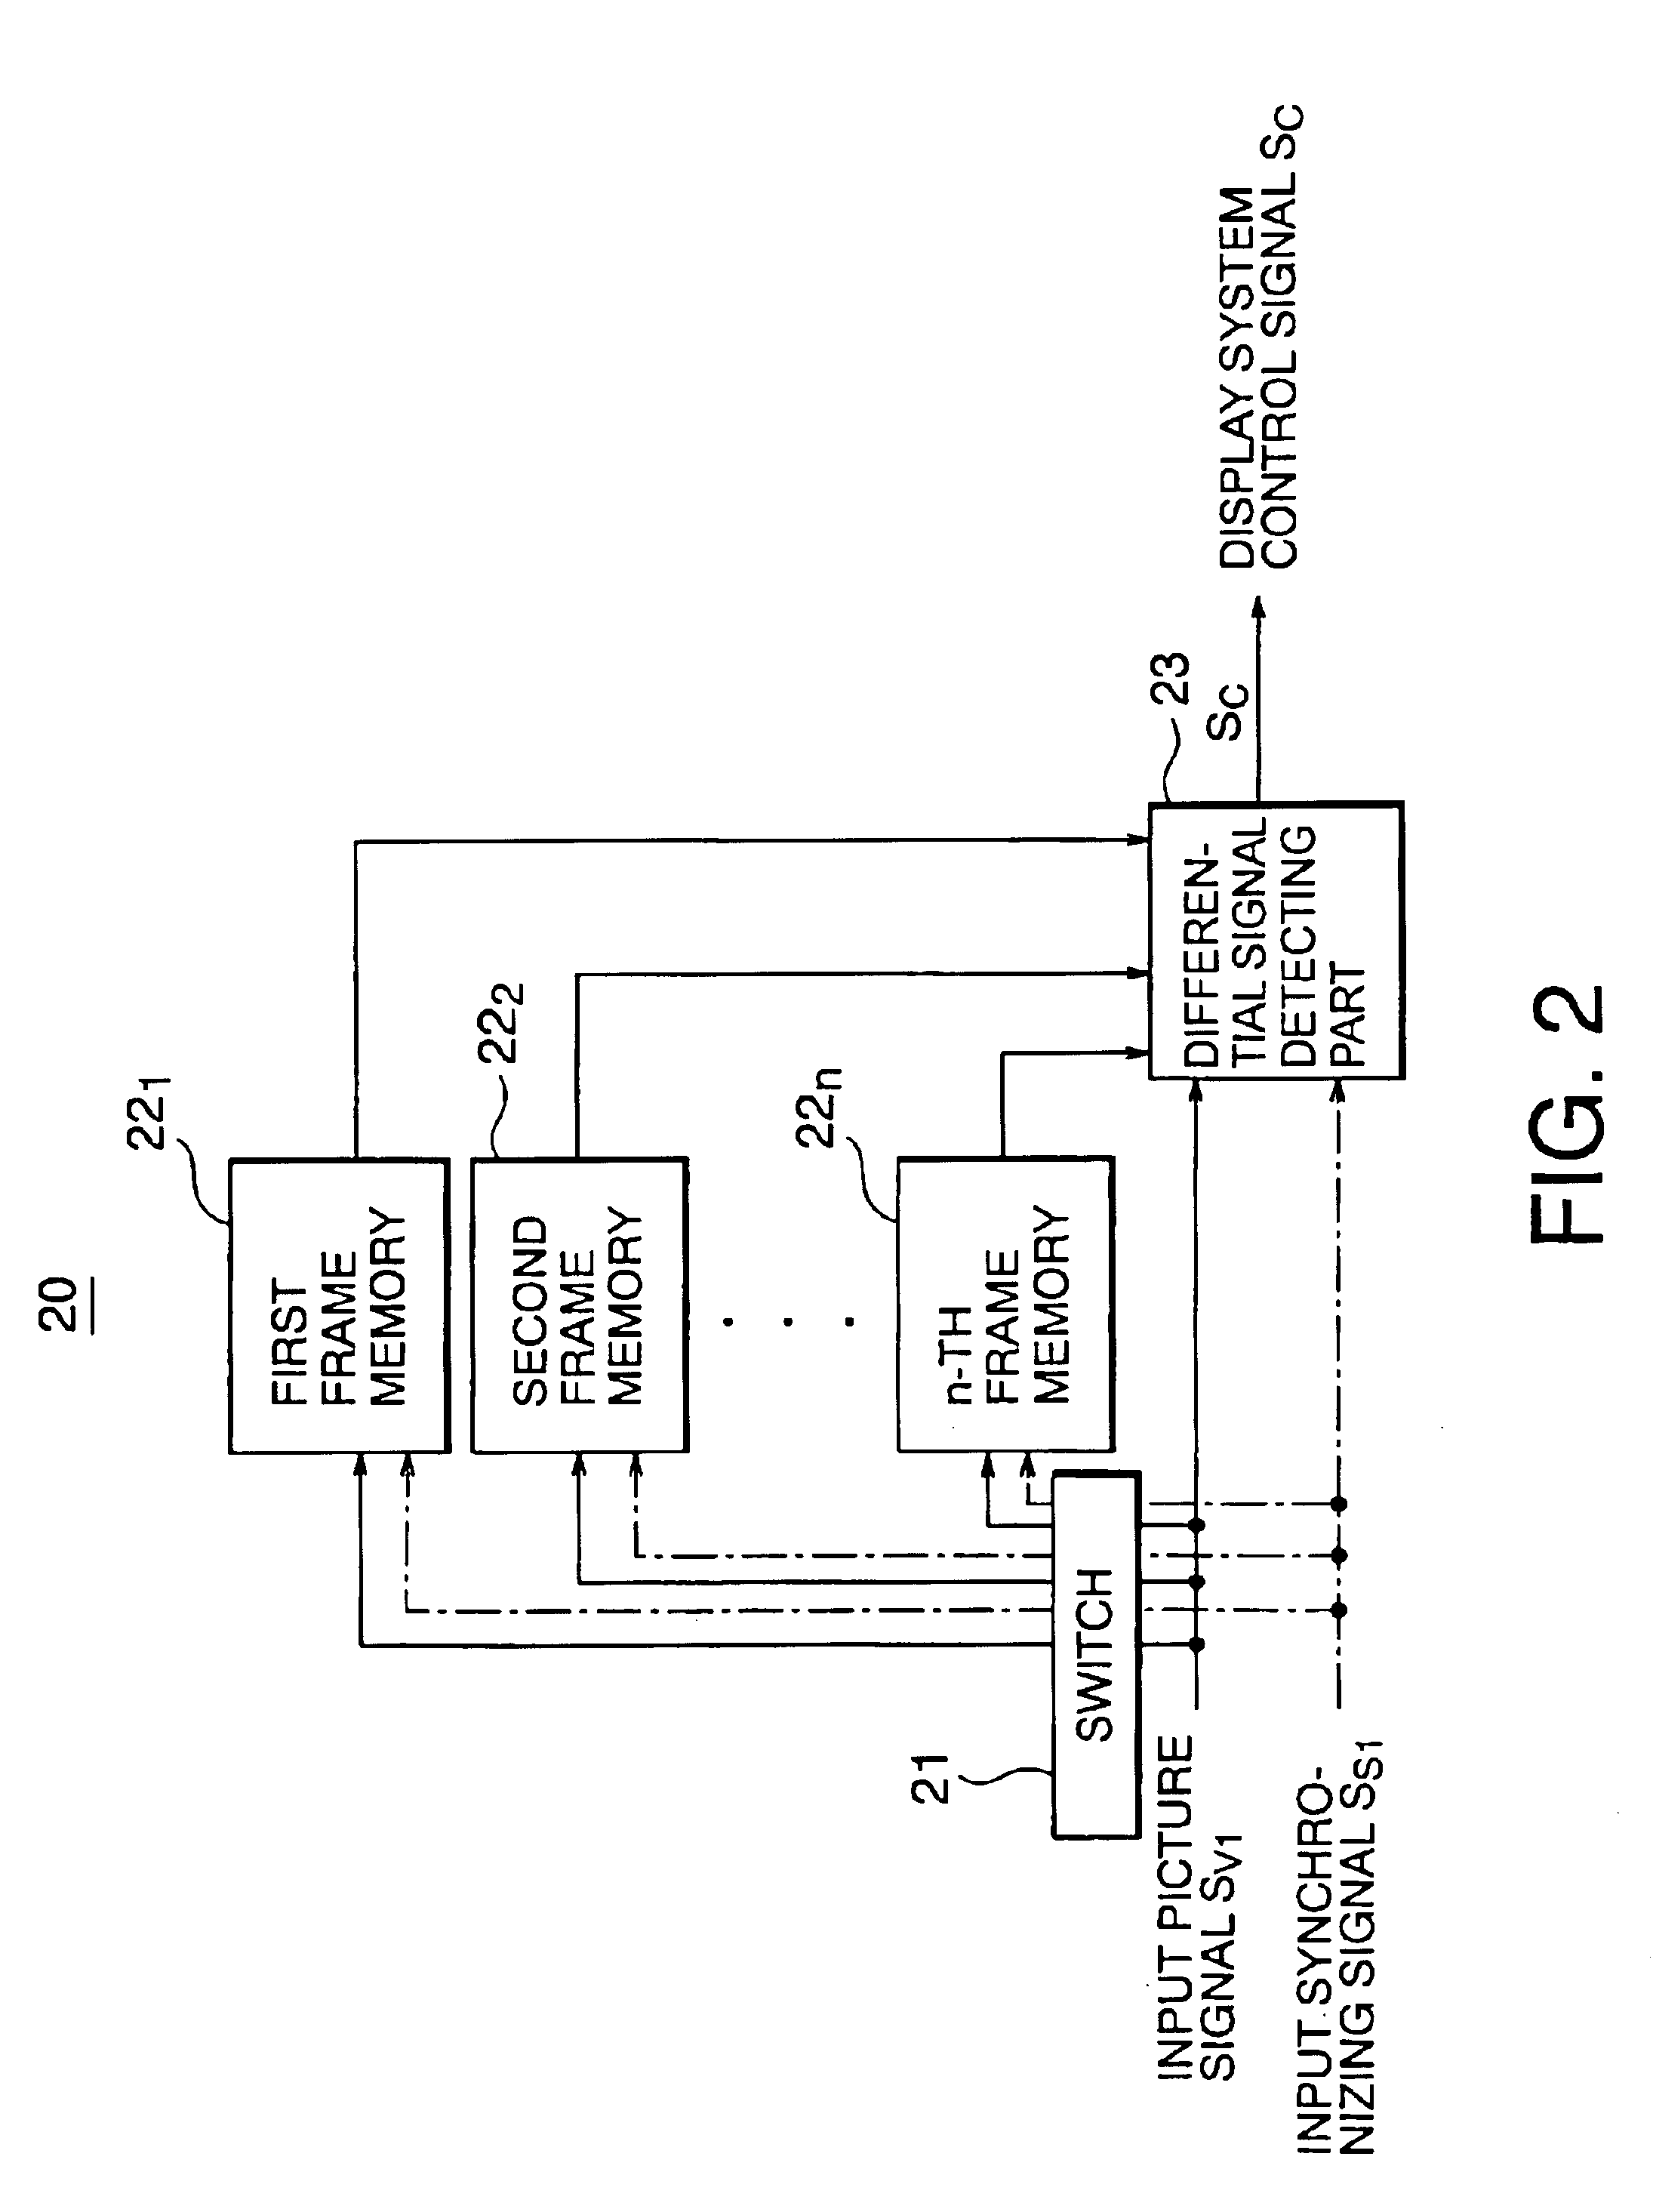 Image processing system and method, and image display system